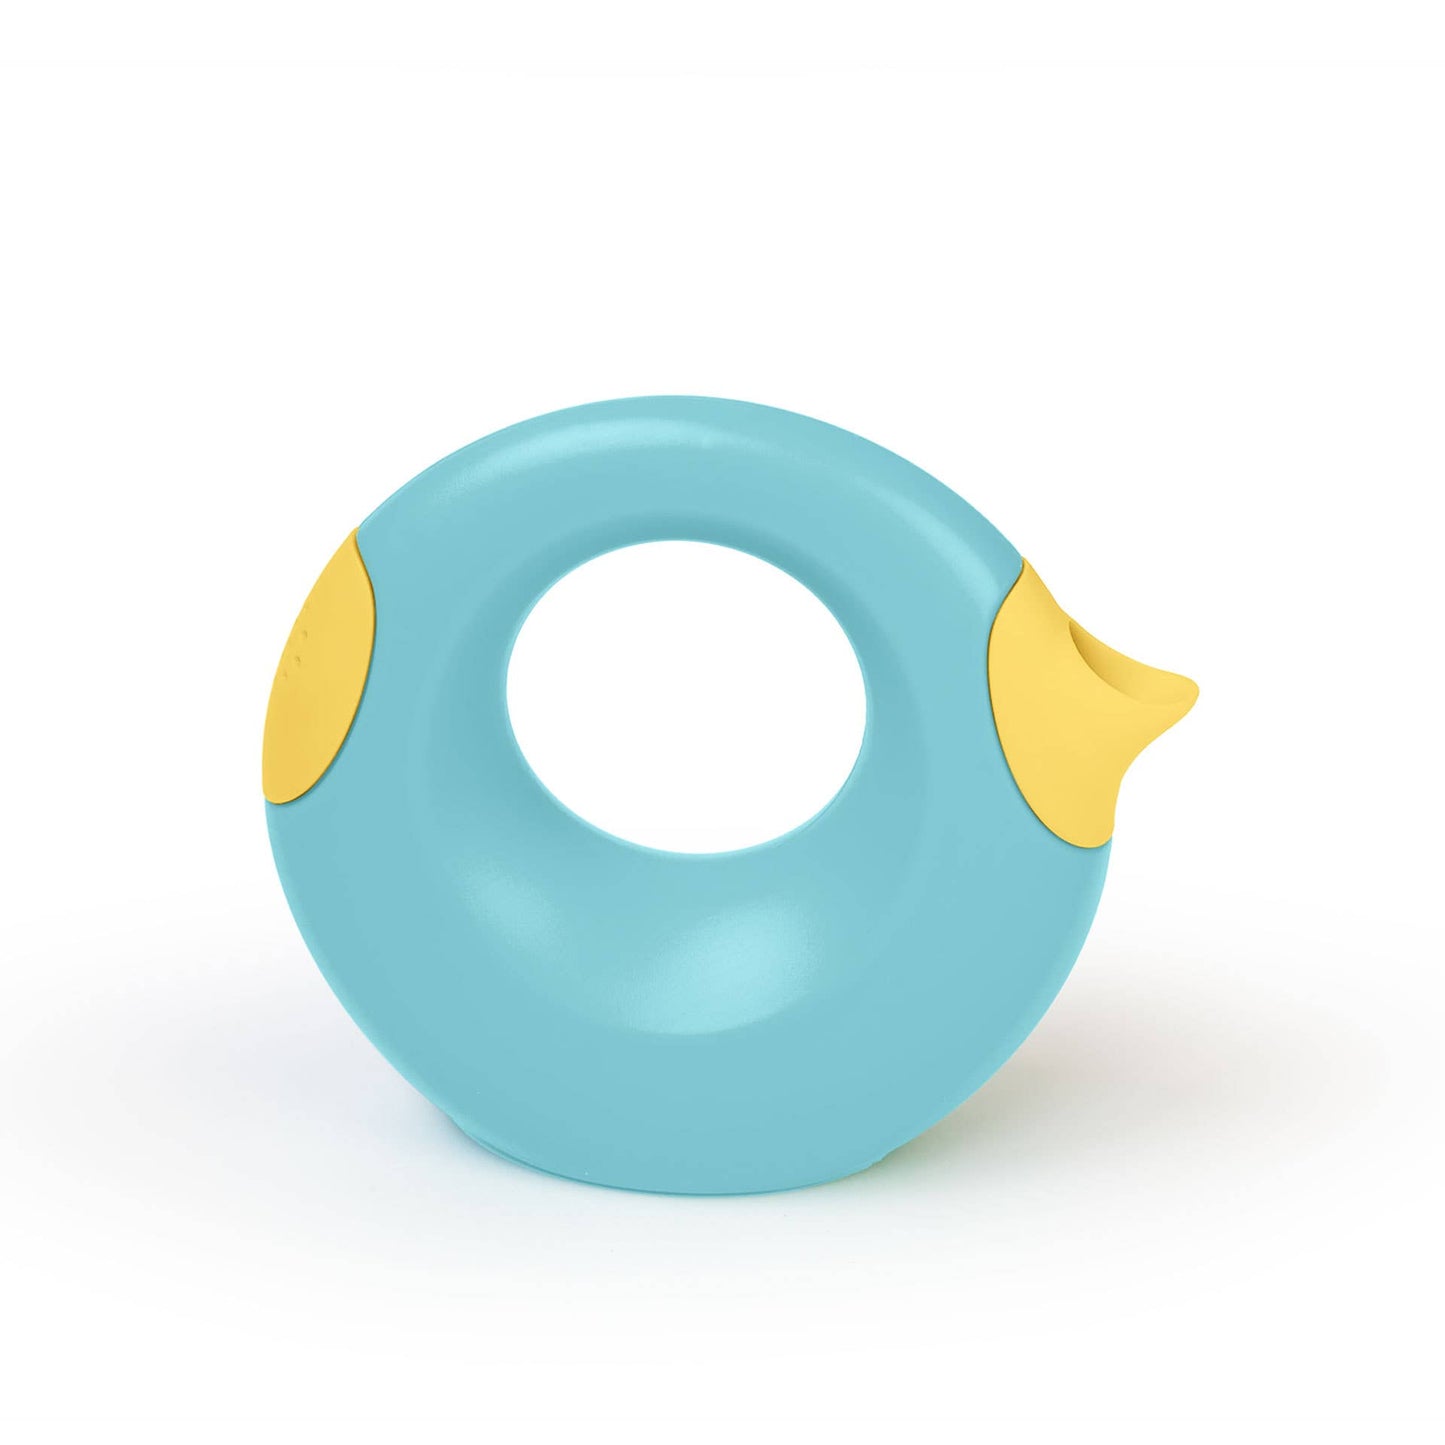 Quut Cana Small - Playful Watering Can. Beach and Sand Toy.